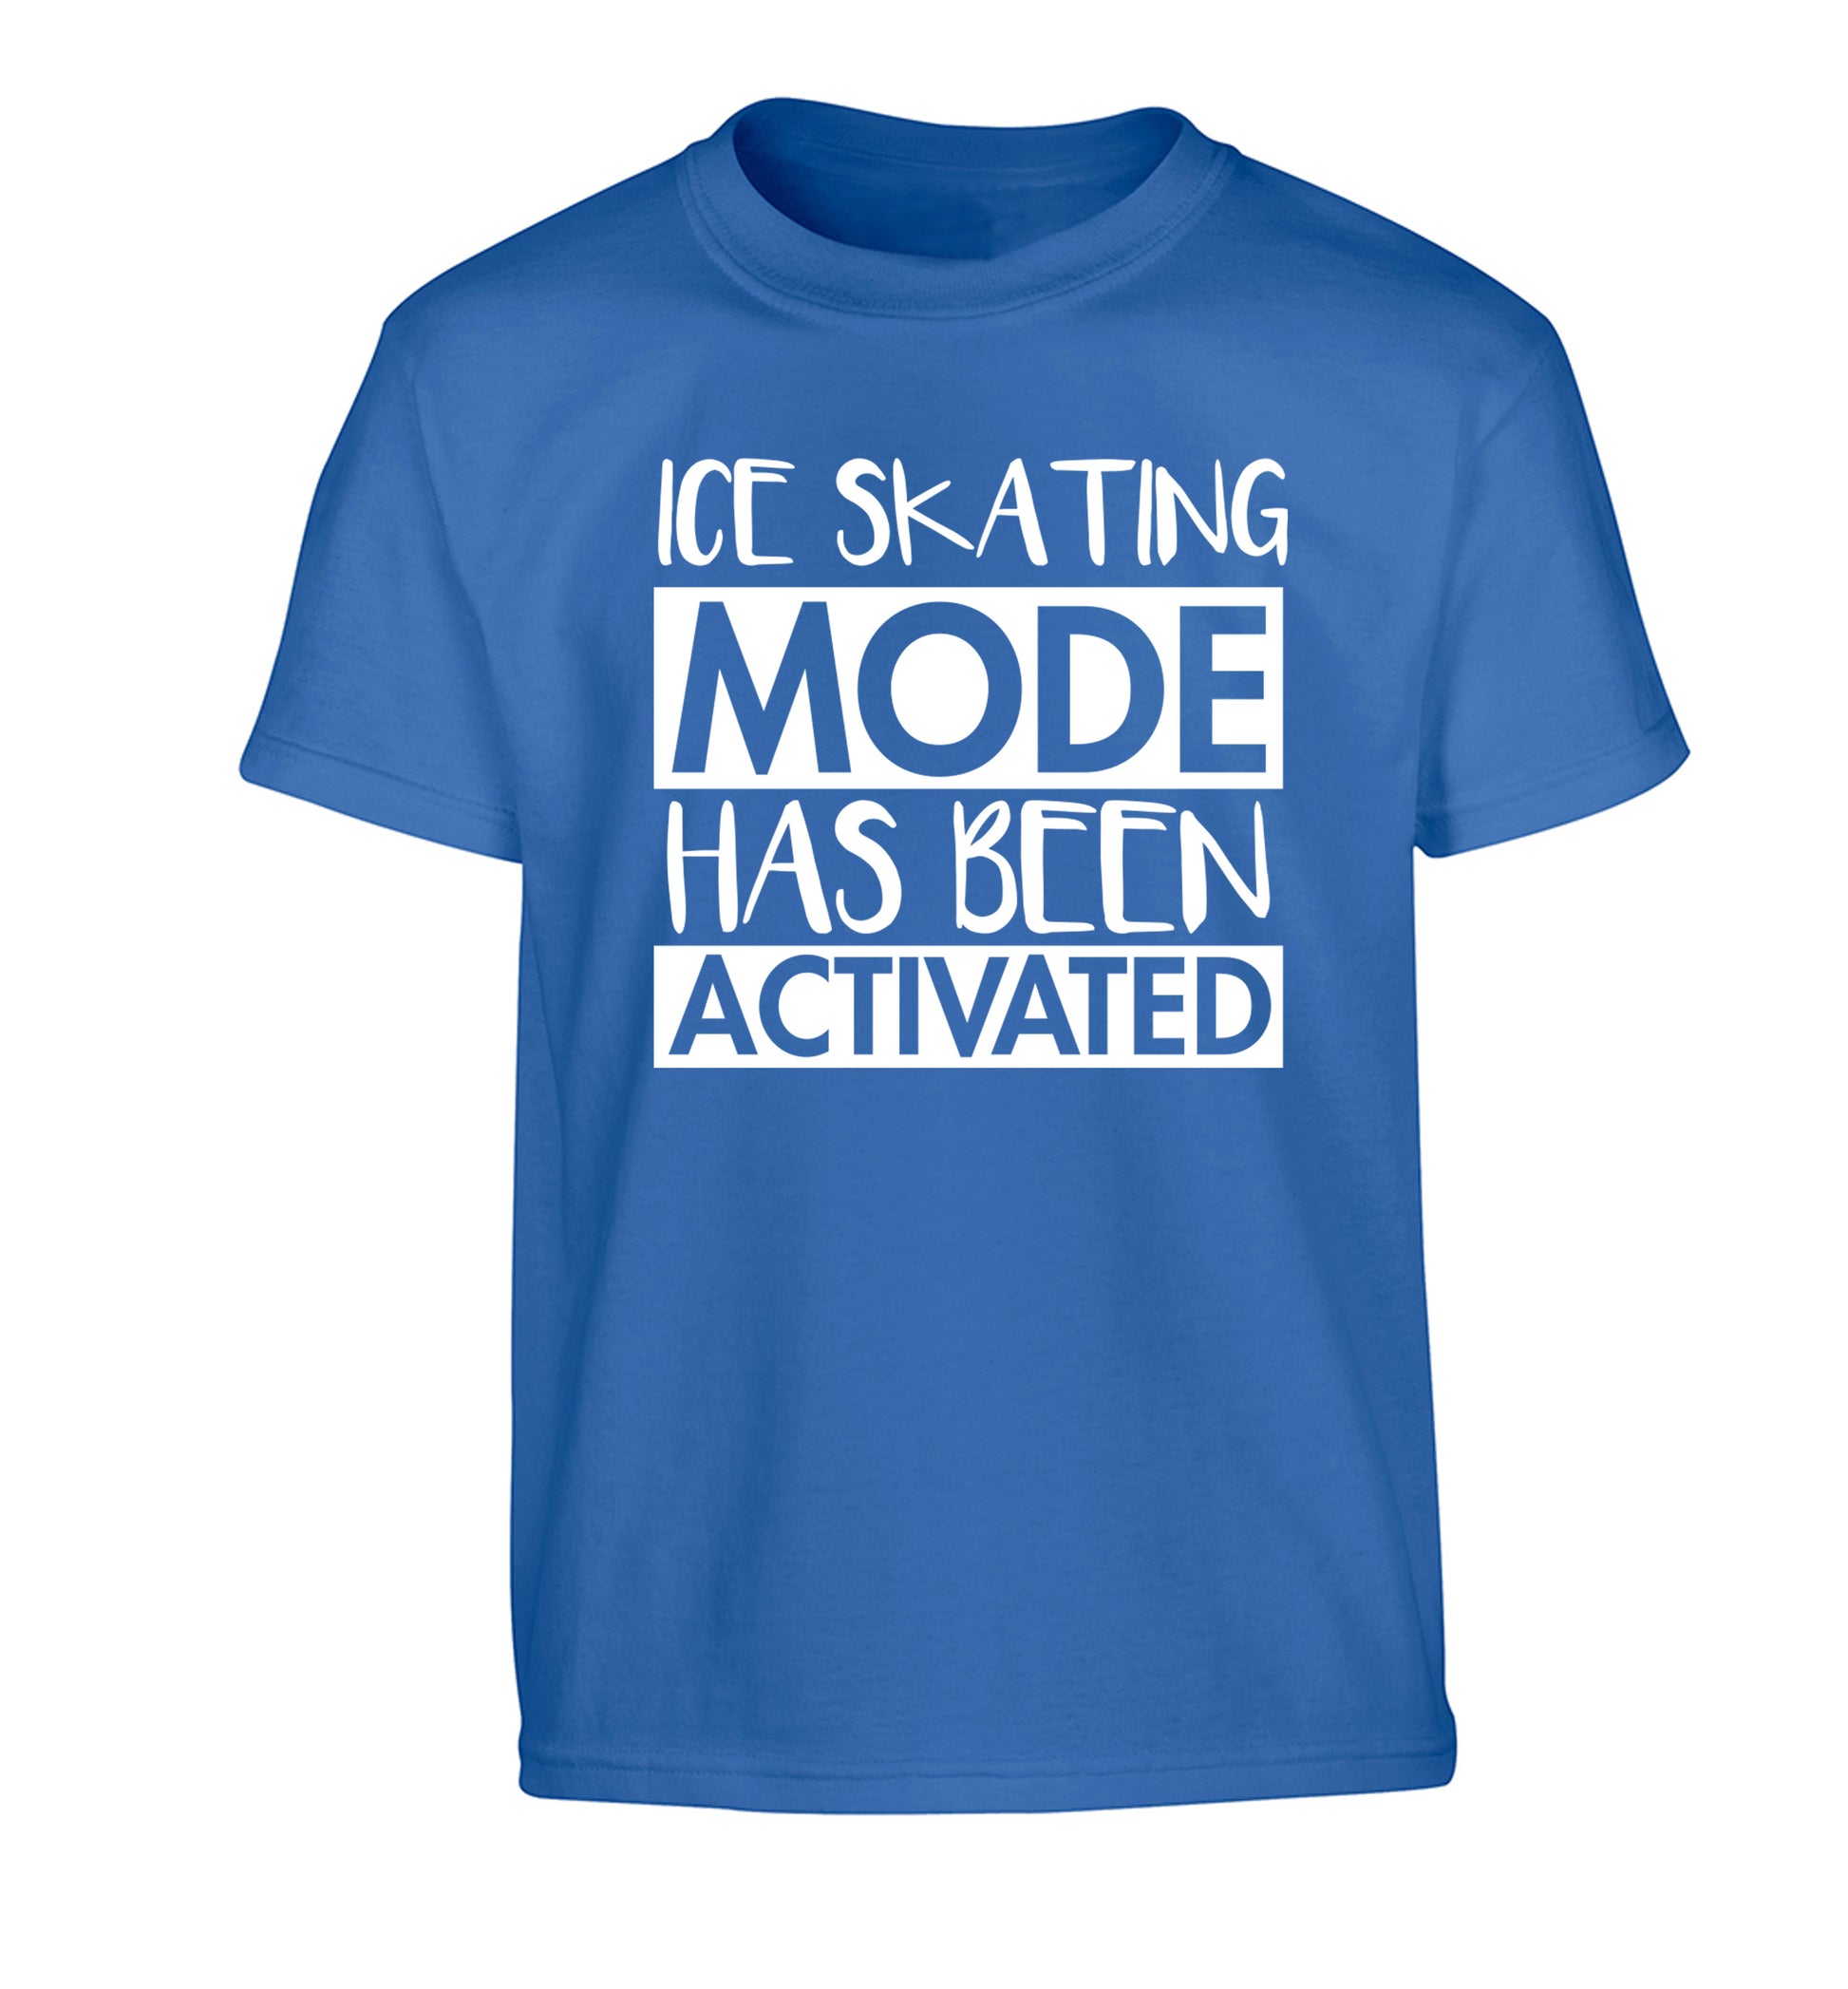 Ice skating mode activated Children's blue Tshirt 12-14 Years